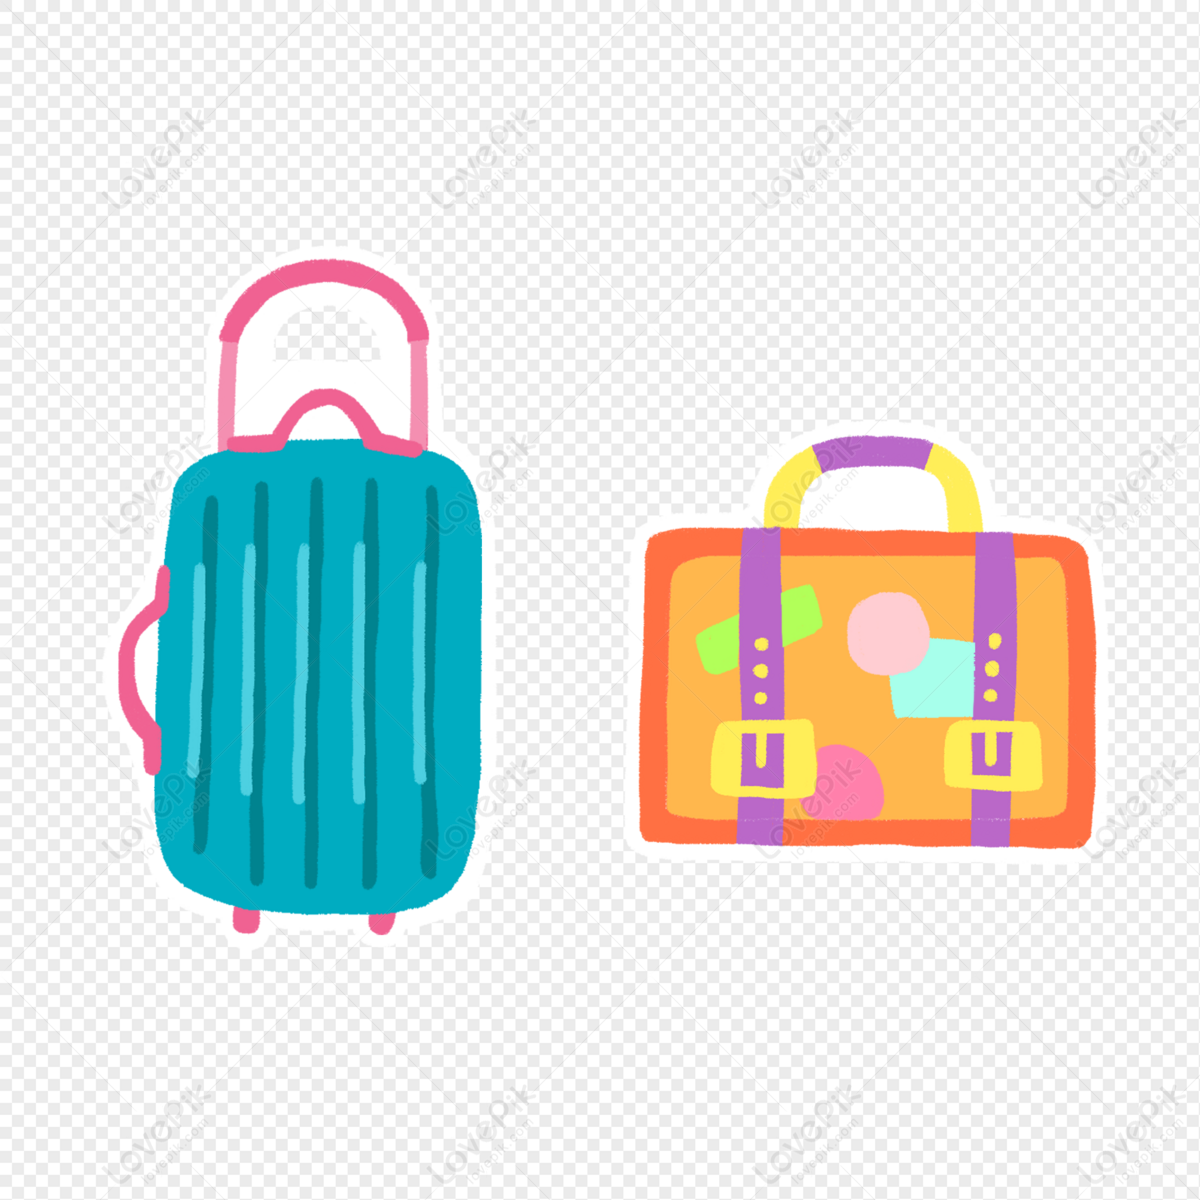 Travel play sticker suitcase, travel, sticker, travel suitcase png transparent background